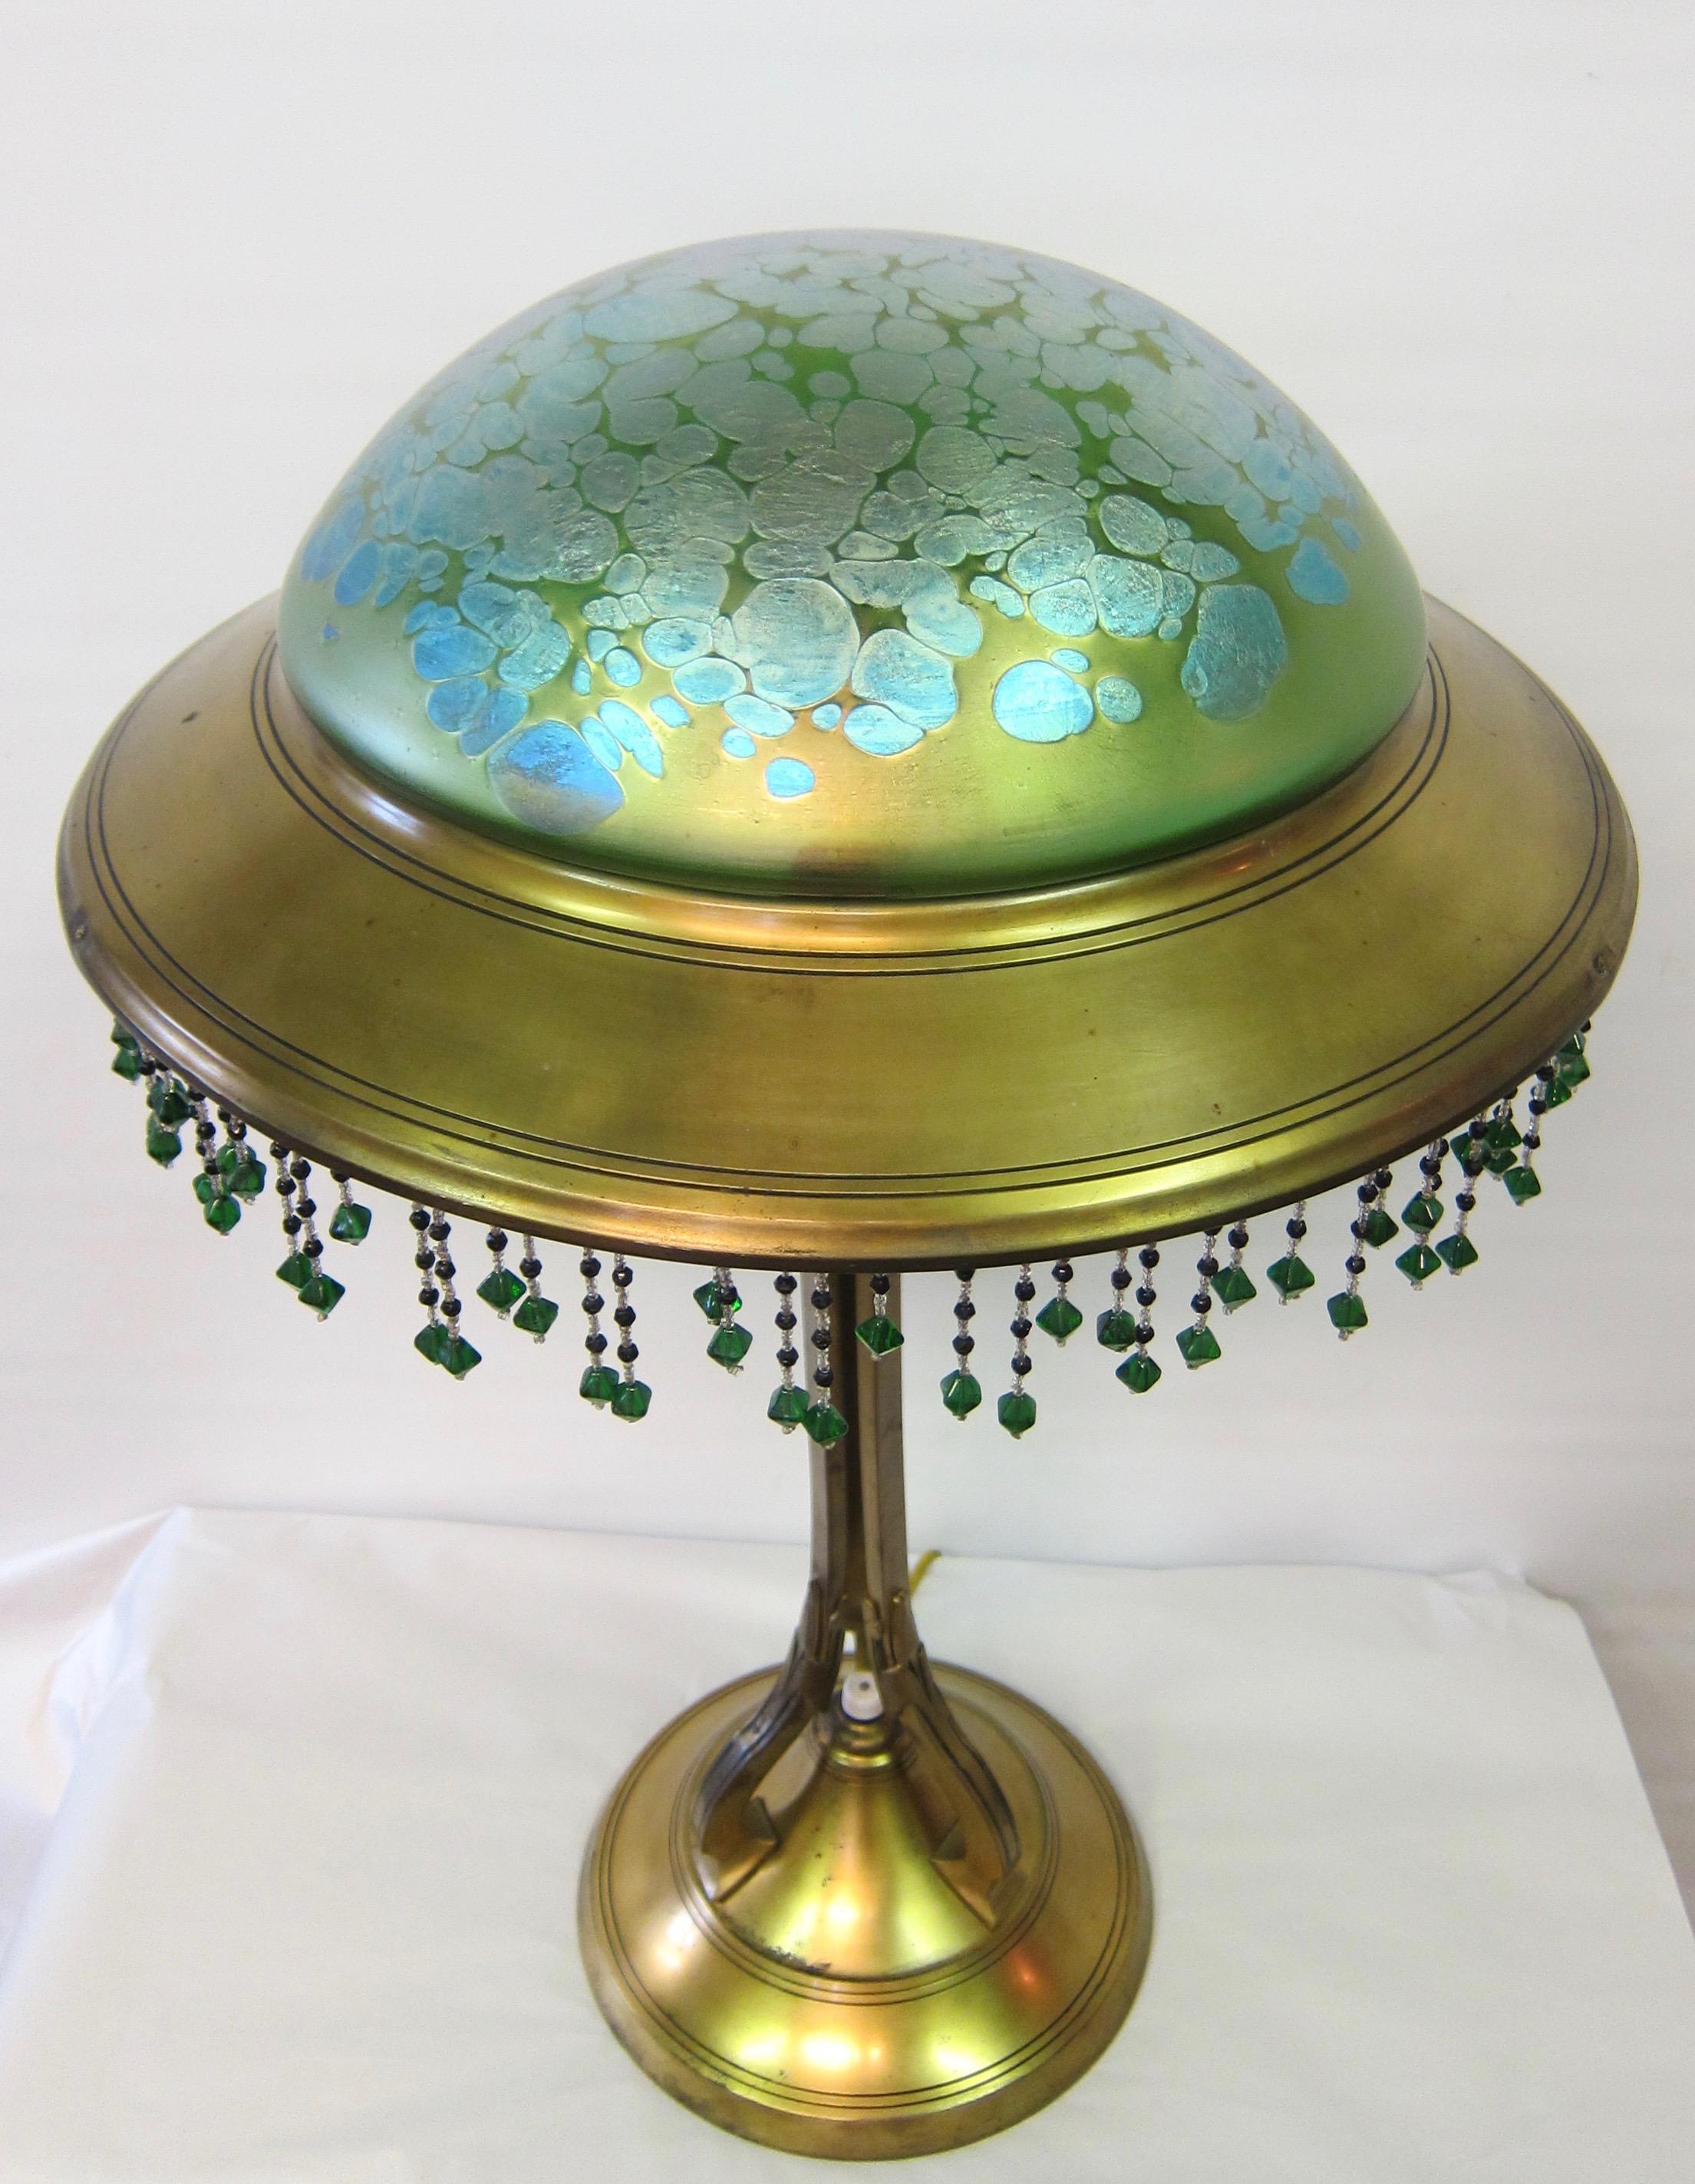 This early 20th century Austrian art nouveau table lamp is from the Loetz factory and has a blue oil spot pattern on a green color dome shape shade. This stunning 12